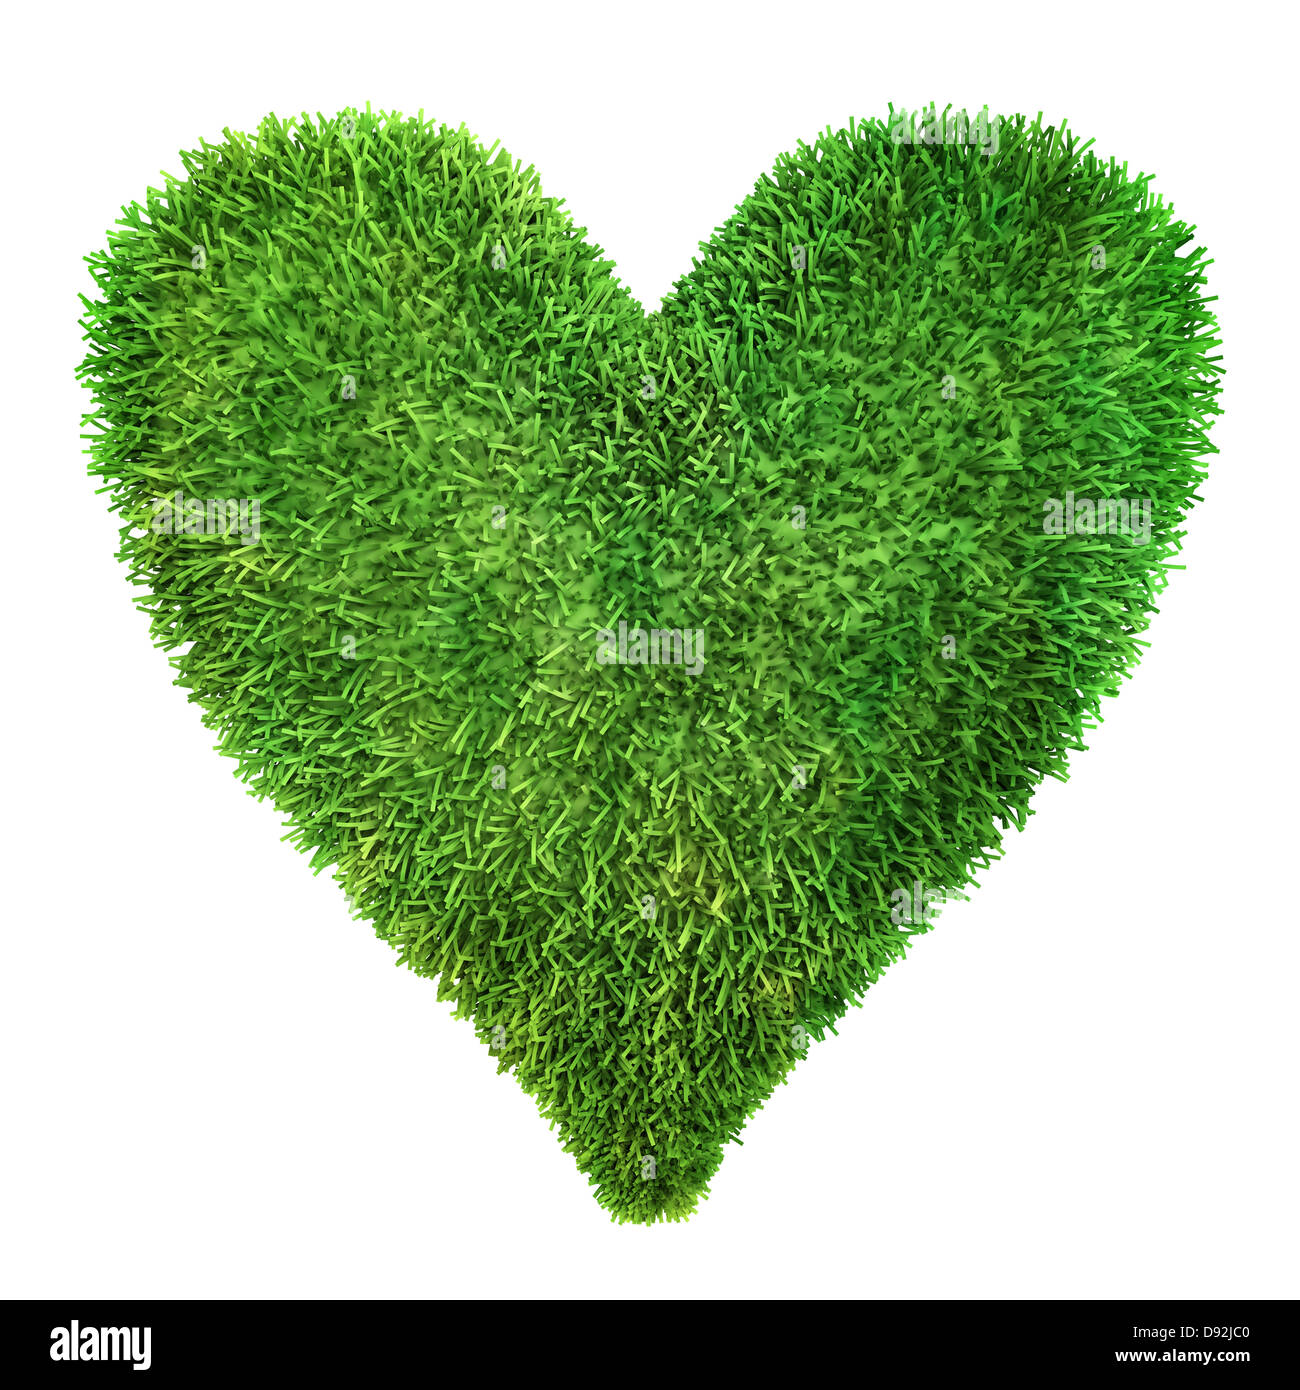 Heart made of grass Stock Photo